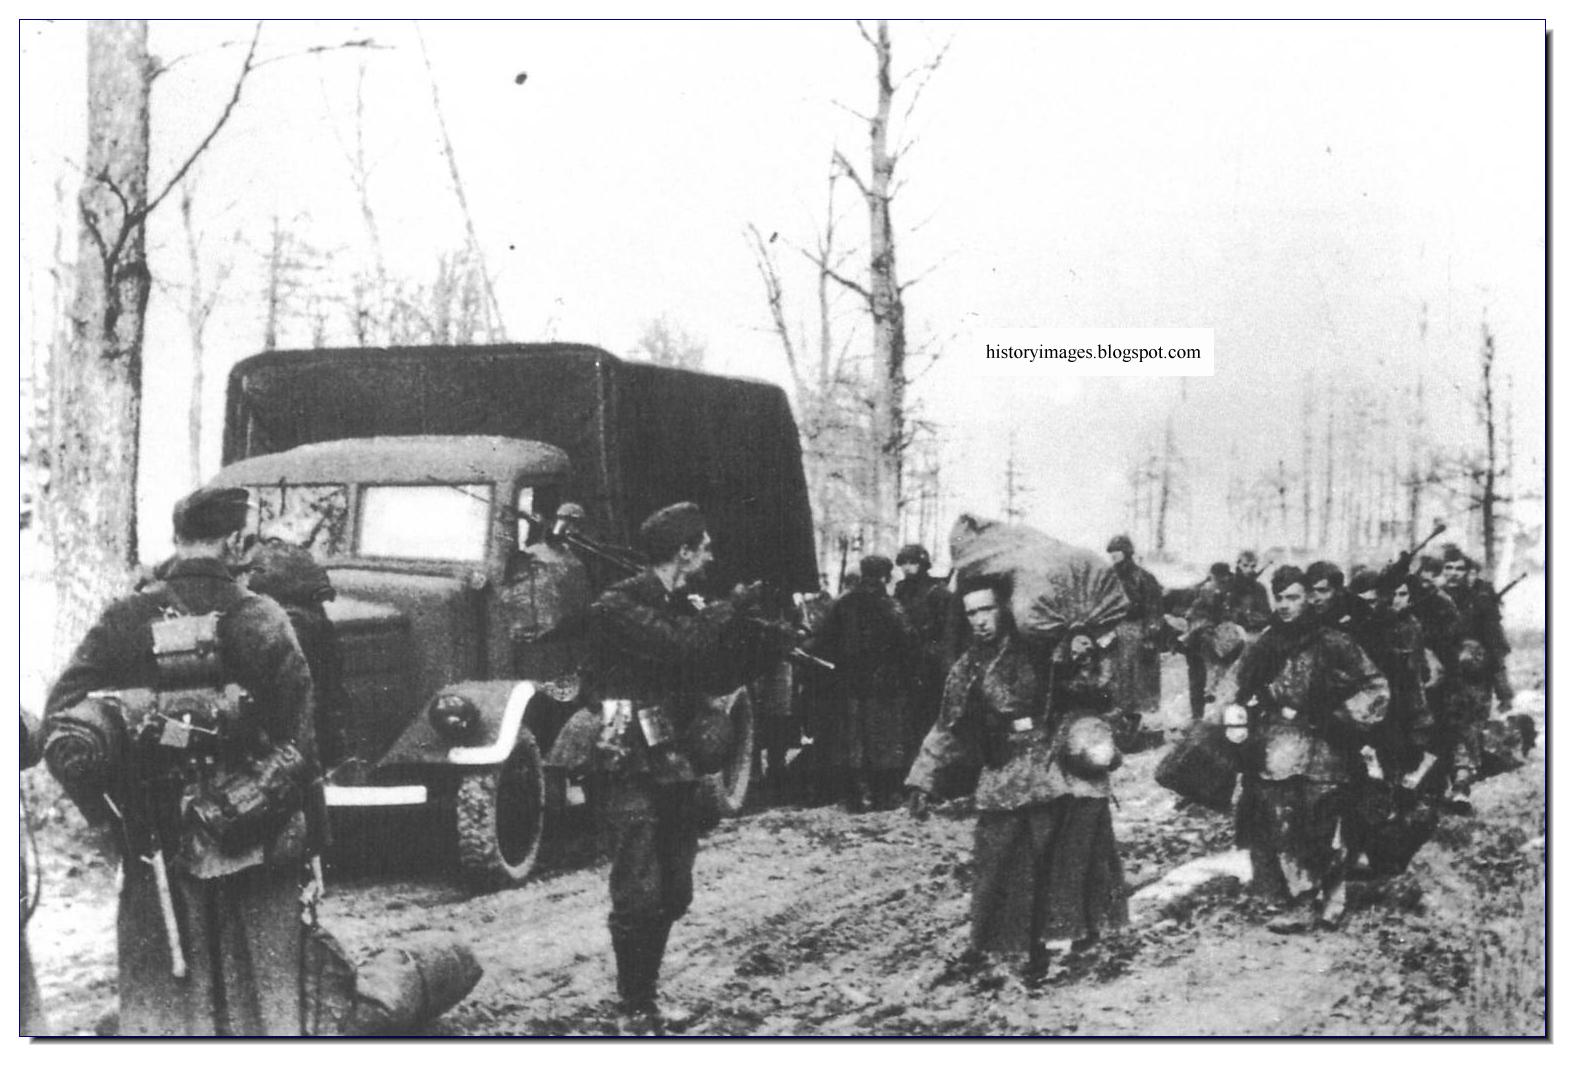 HISTORY IN IMAGES  Downfall  Slow Decimation Of The German Army